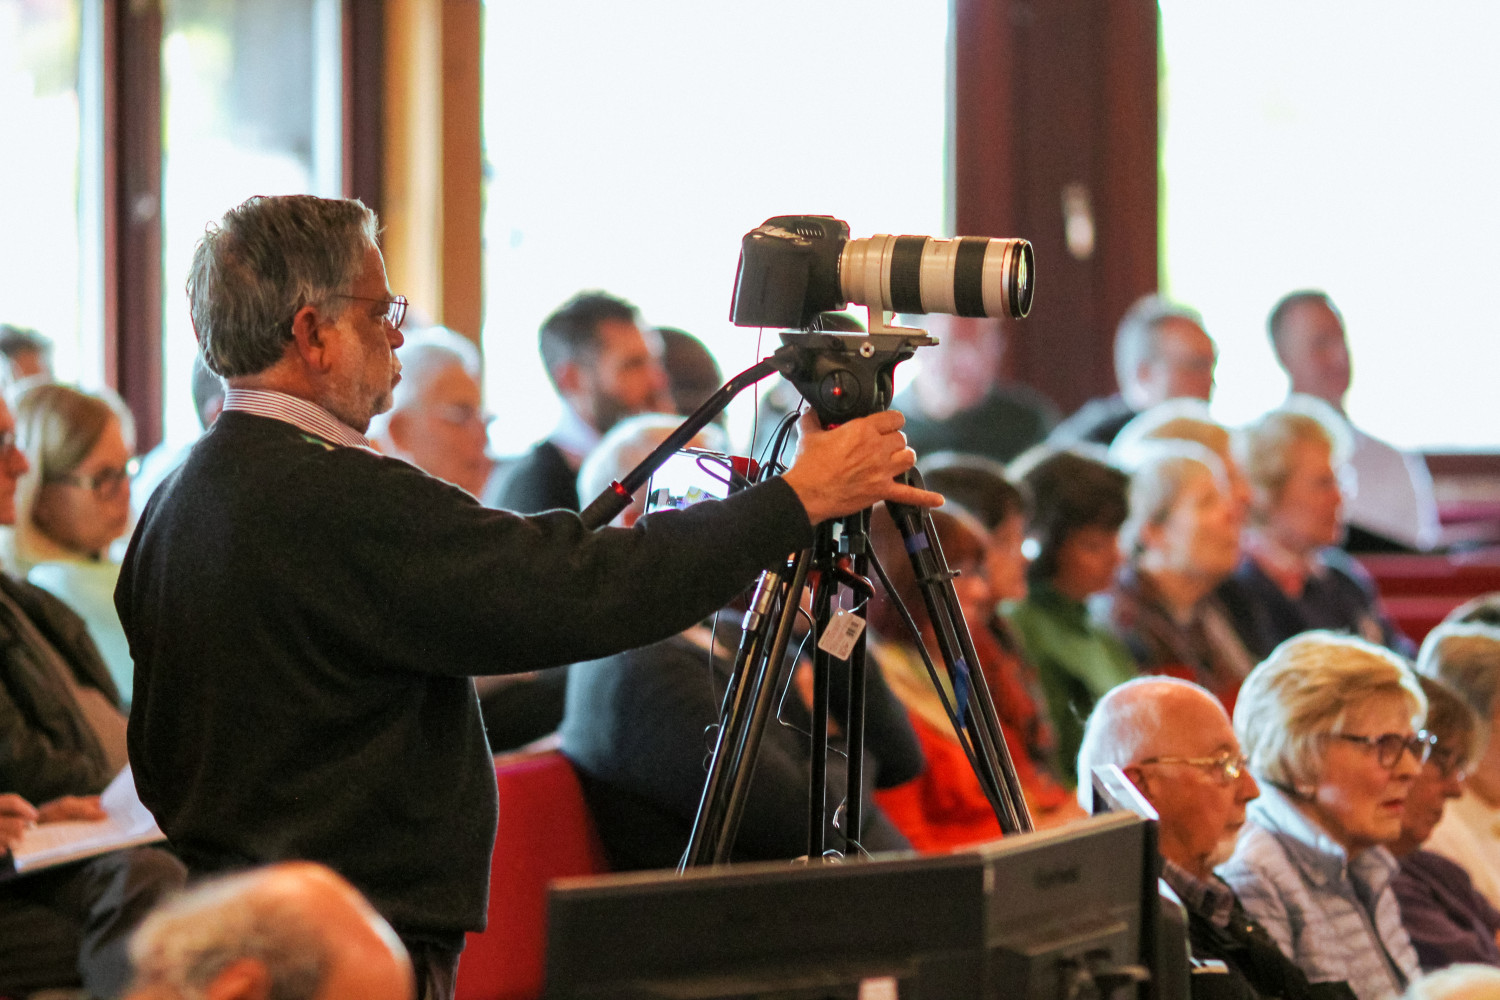 Camera operator at a conference